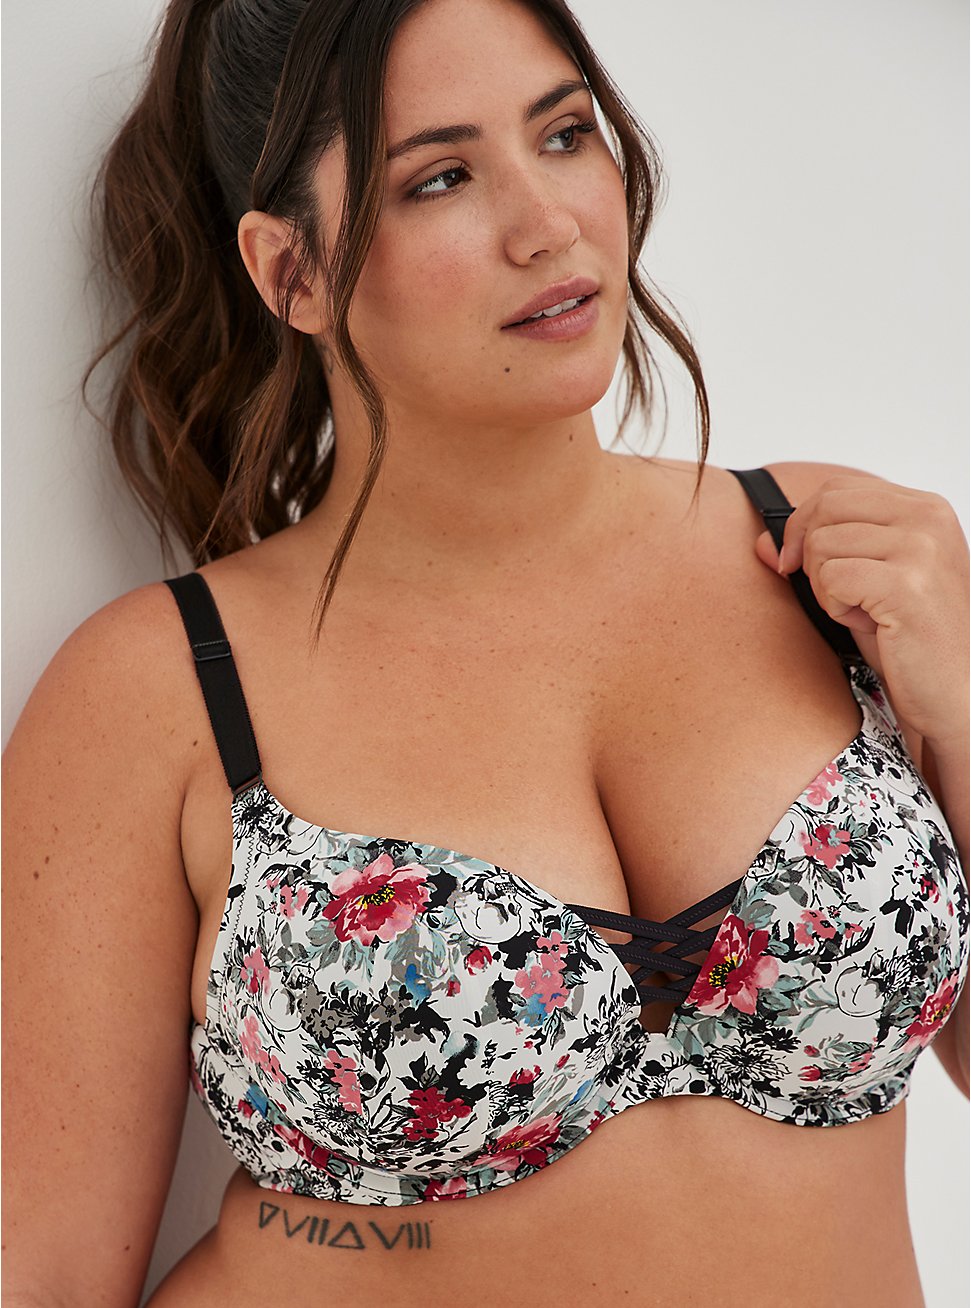 Plus Size XO Push-Up Plunge Bra - Microfiber Floral Skulls White with 360° Back Smoothing™, CAREFREE FLORAL SKULL, hi-res